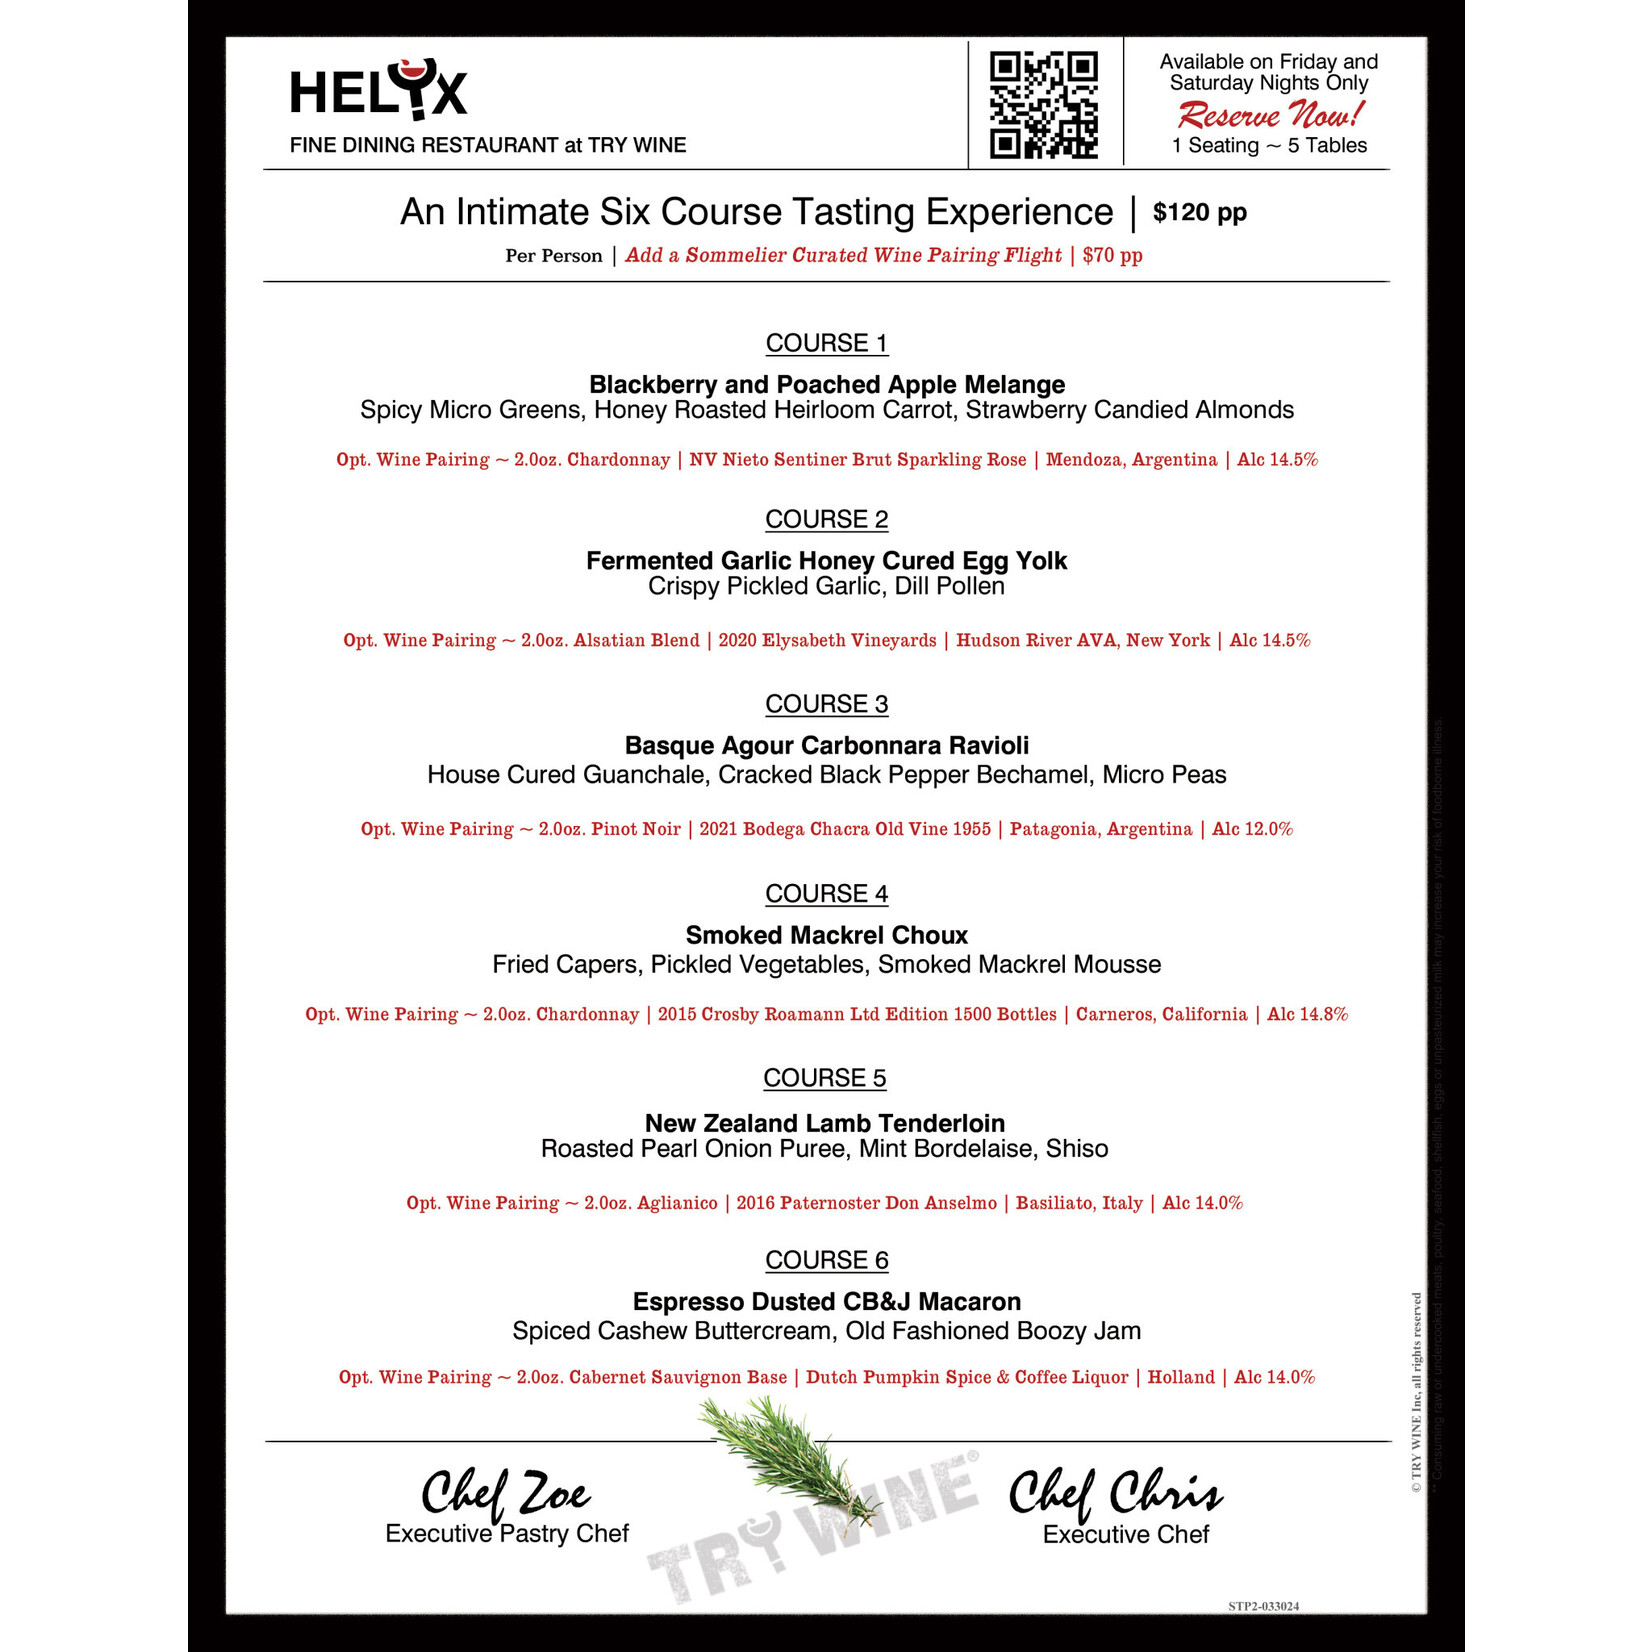 NEW - HELYX Restaurant 6 Course Tasting Experience ~ Saturday May 4th at 7:30pm ~ per person